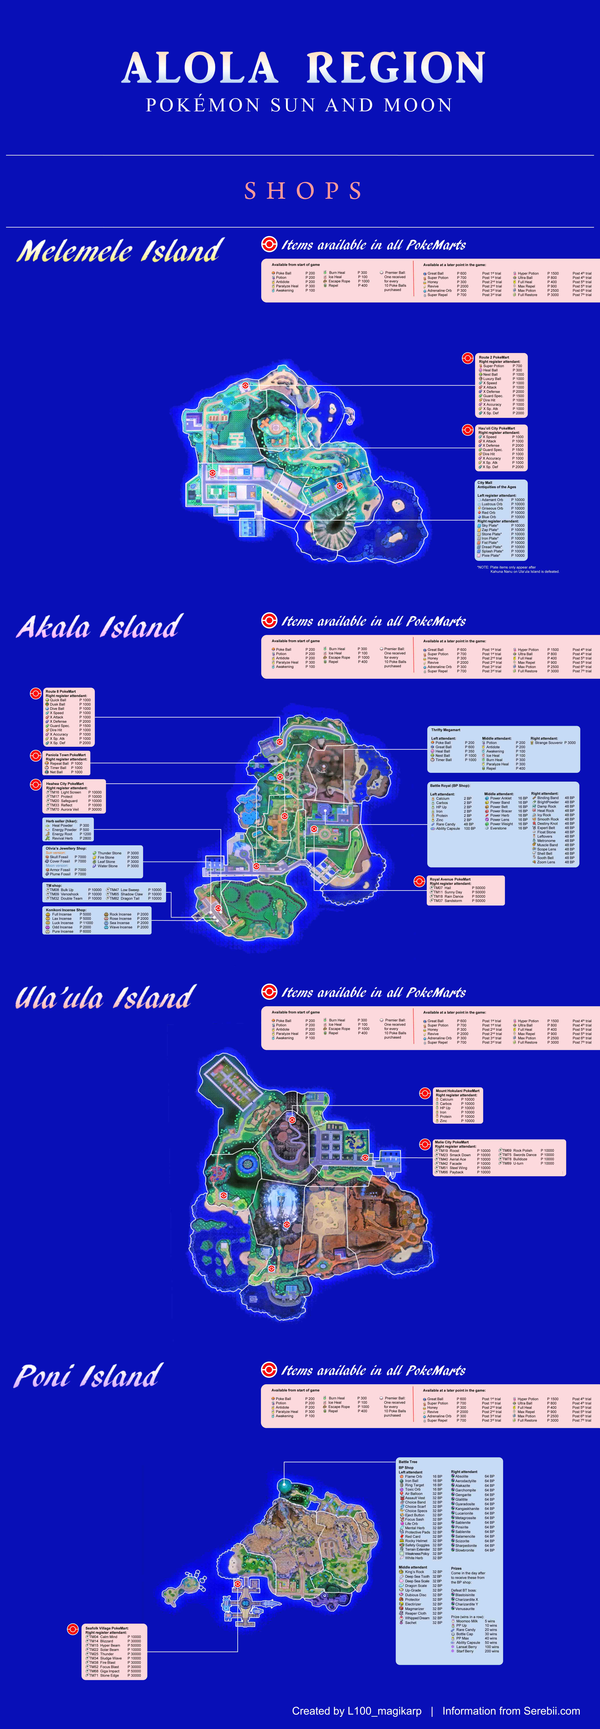 ./20161223-2259-cet-pokemon-sun-and-pokemon-moon-map-guide-12.png